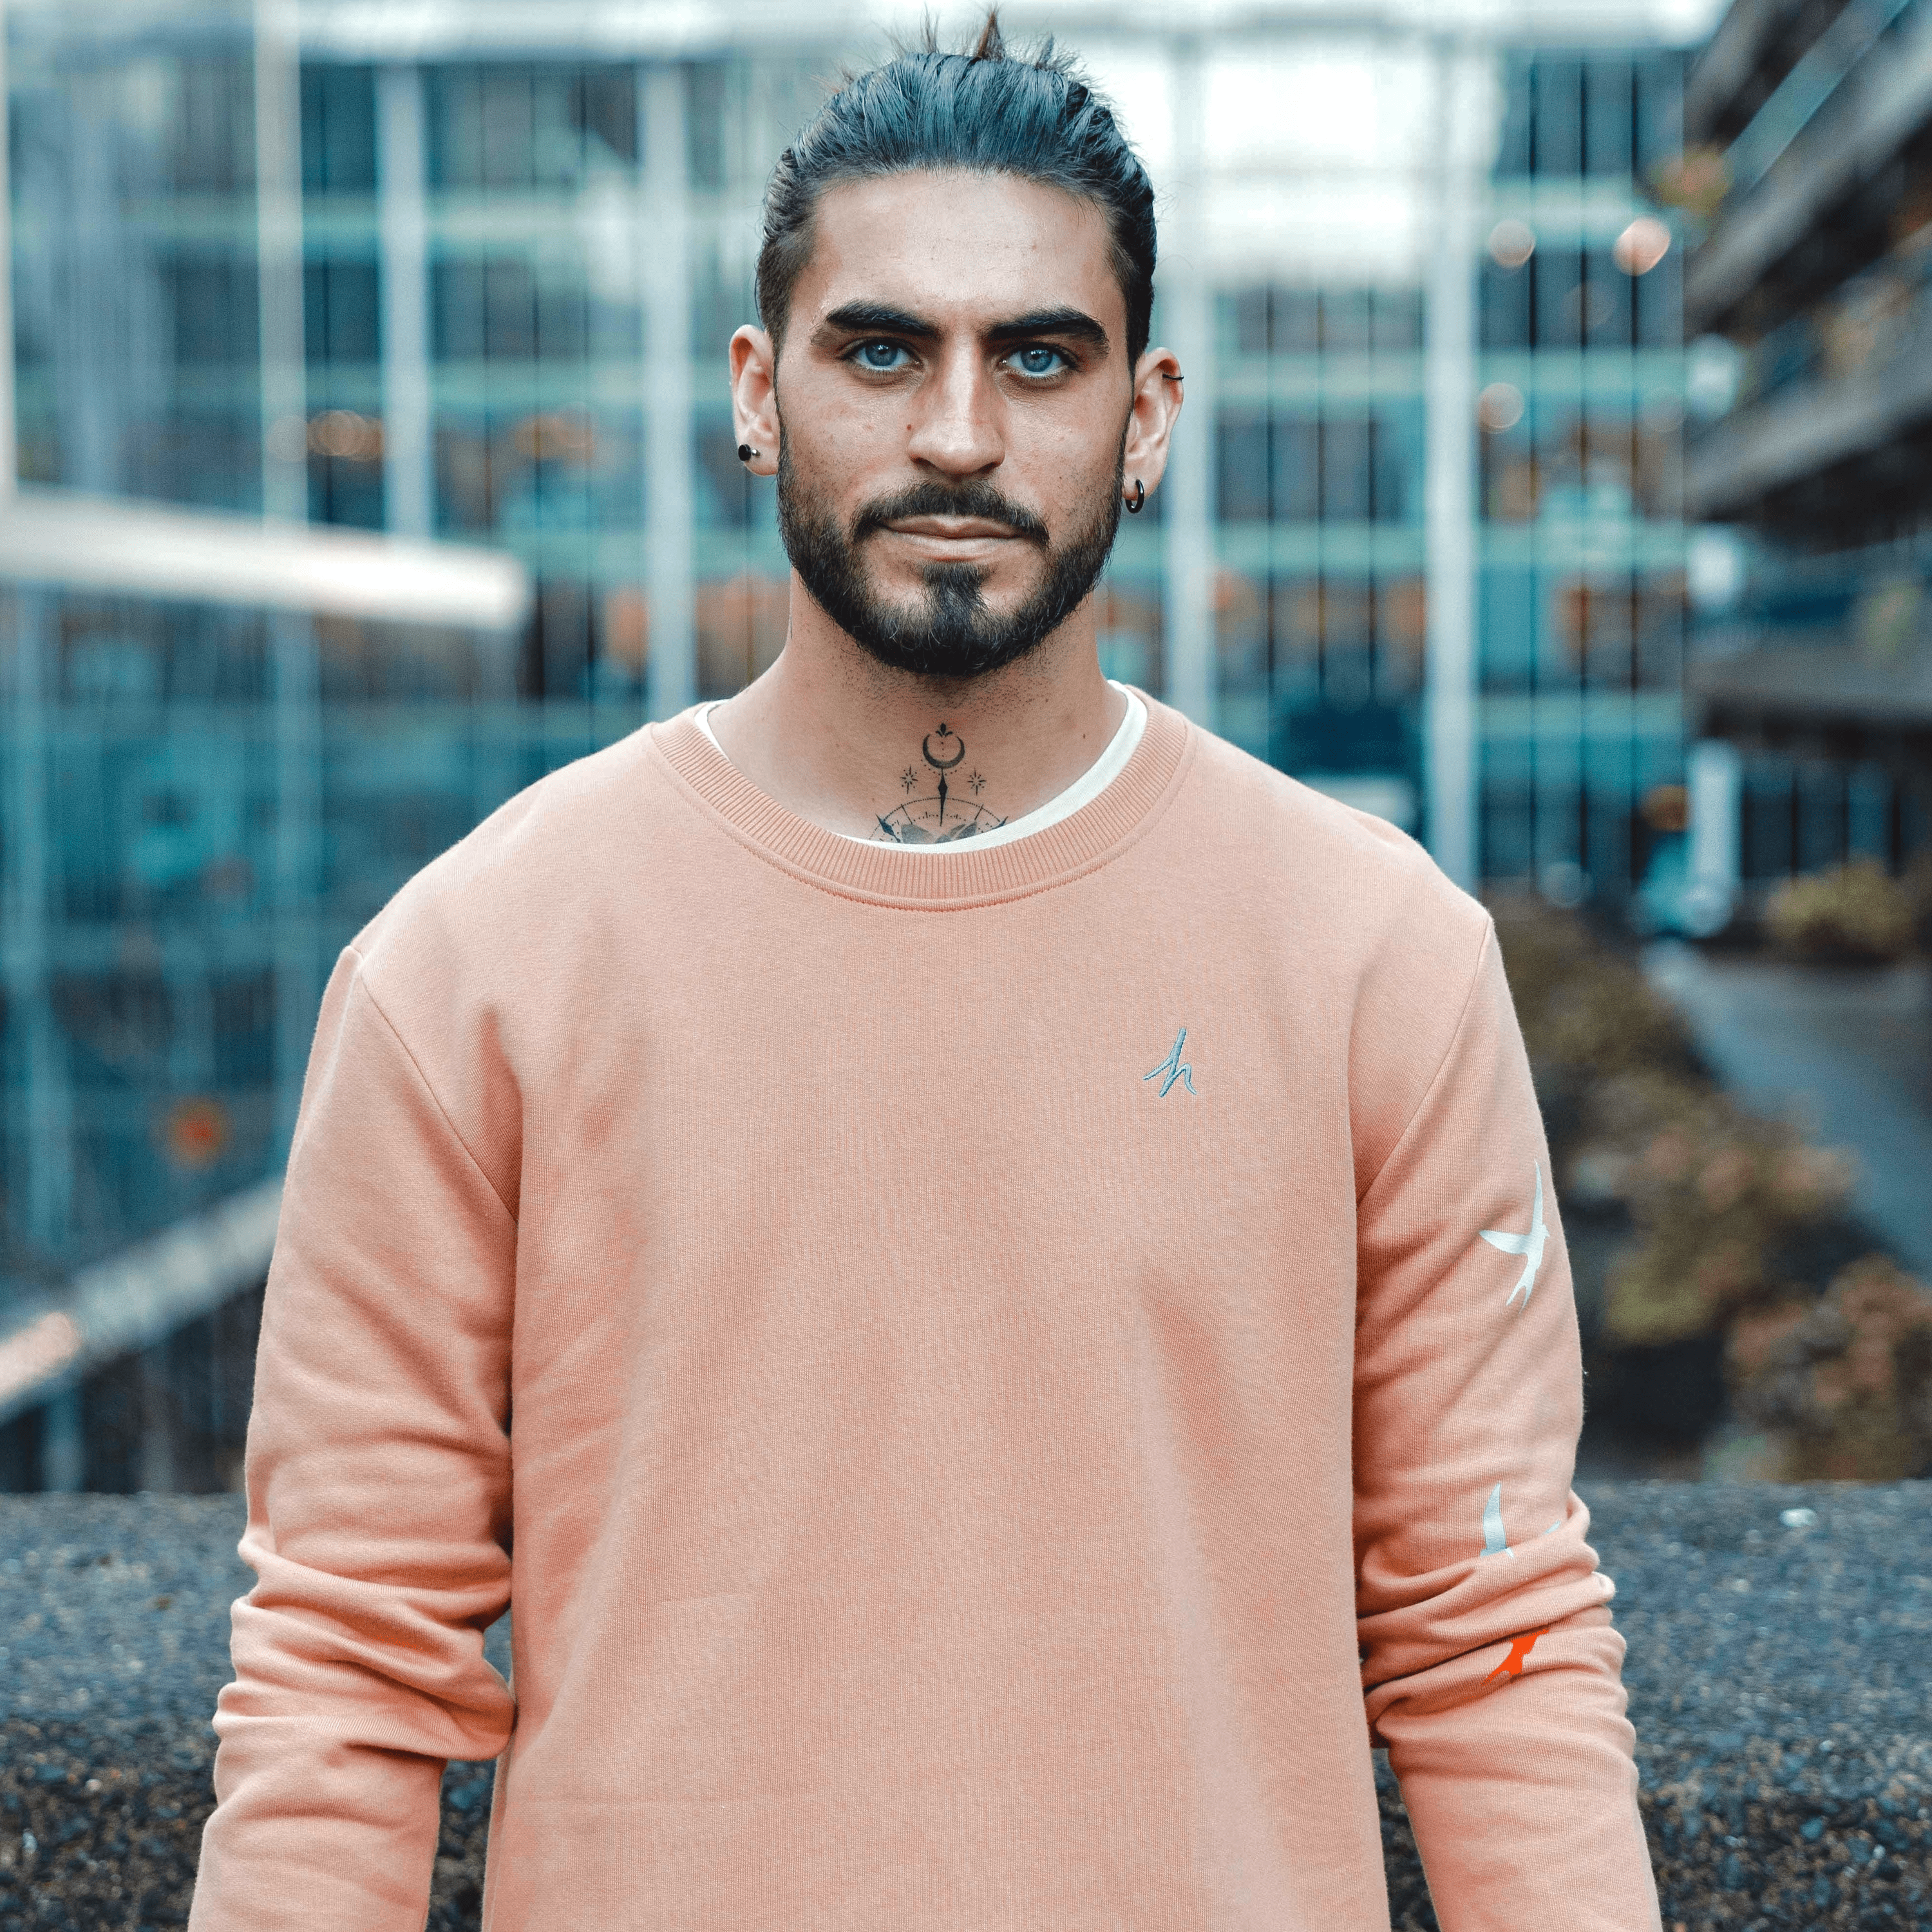 h clothing - male model facing the camera wearing pastel orange sweatshirt with blue h logo and colourful birds going down left arm